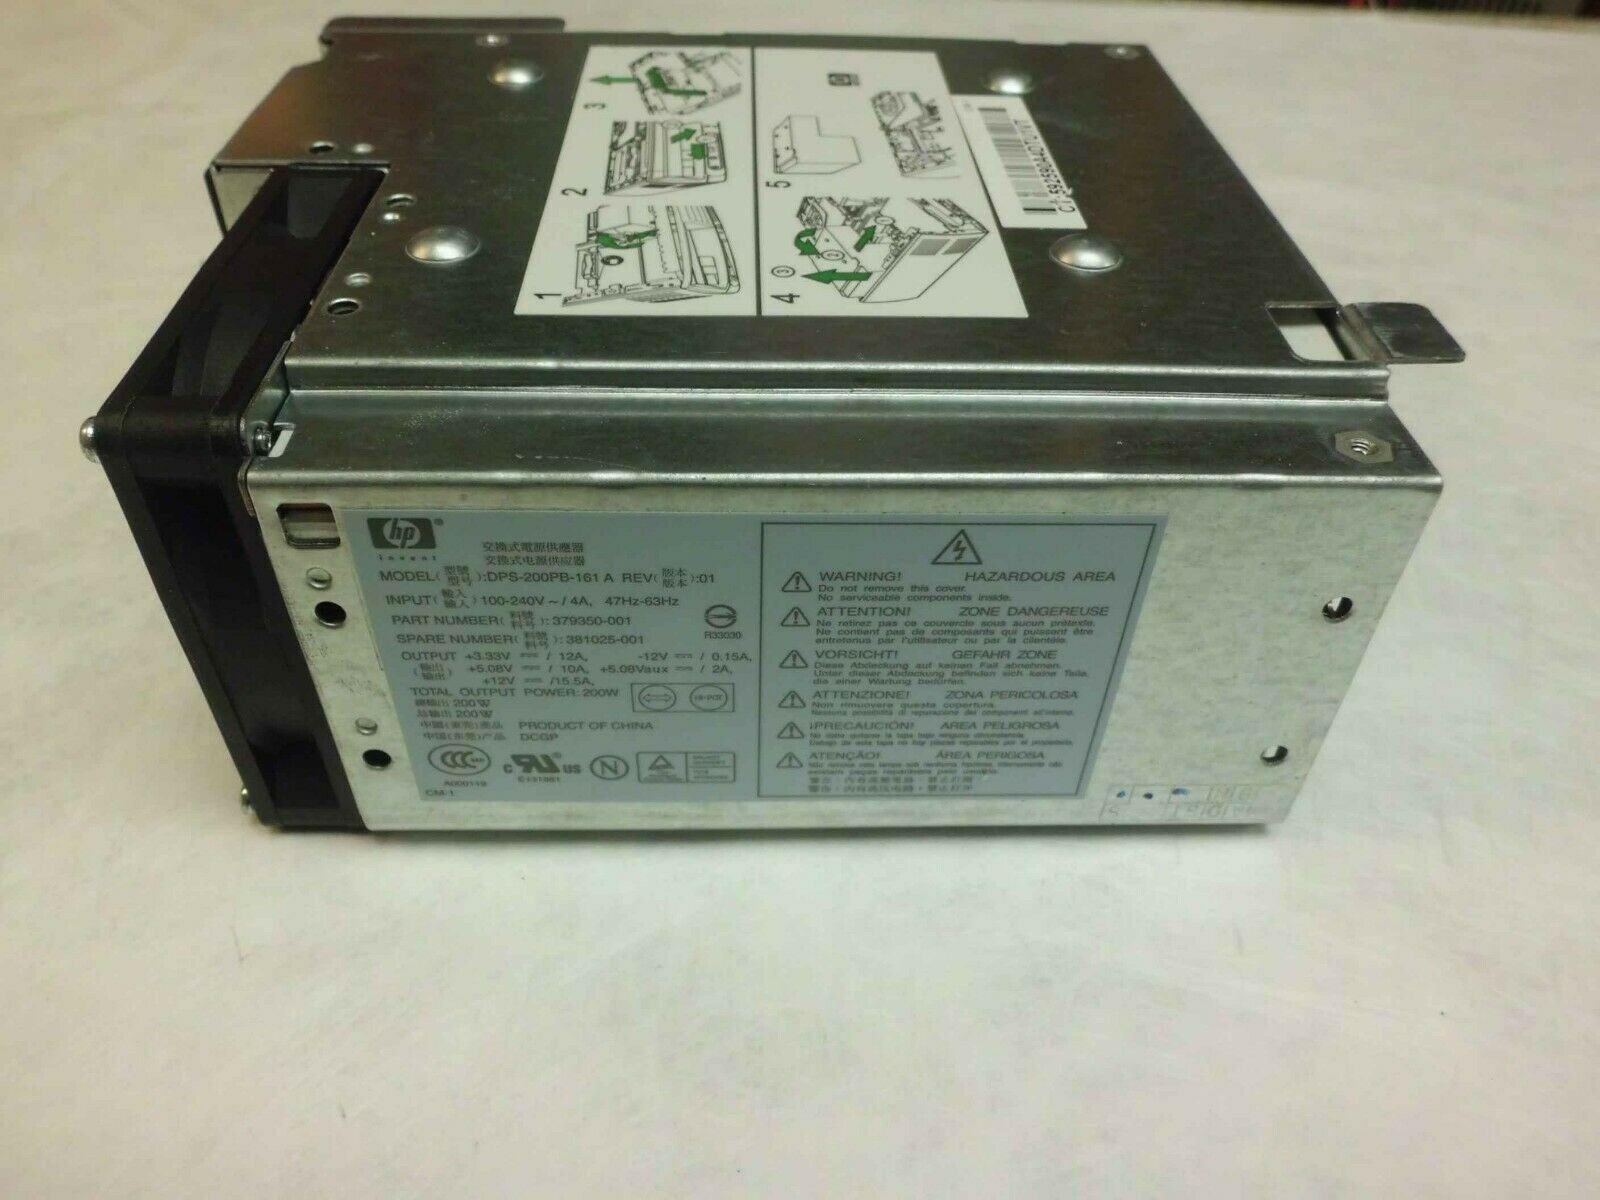 DPS 200PB 161 379350 001 381025 001 220w power supply 90 132 180 264vac operational 100 127 200 240vac rated with active power factor correction pfc